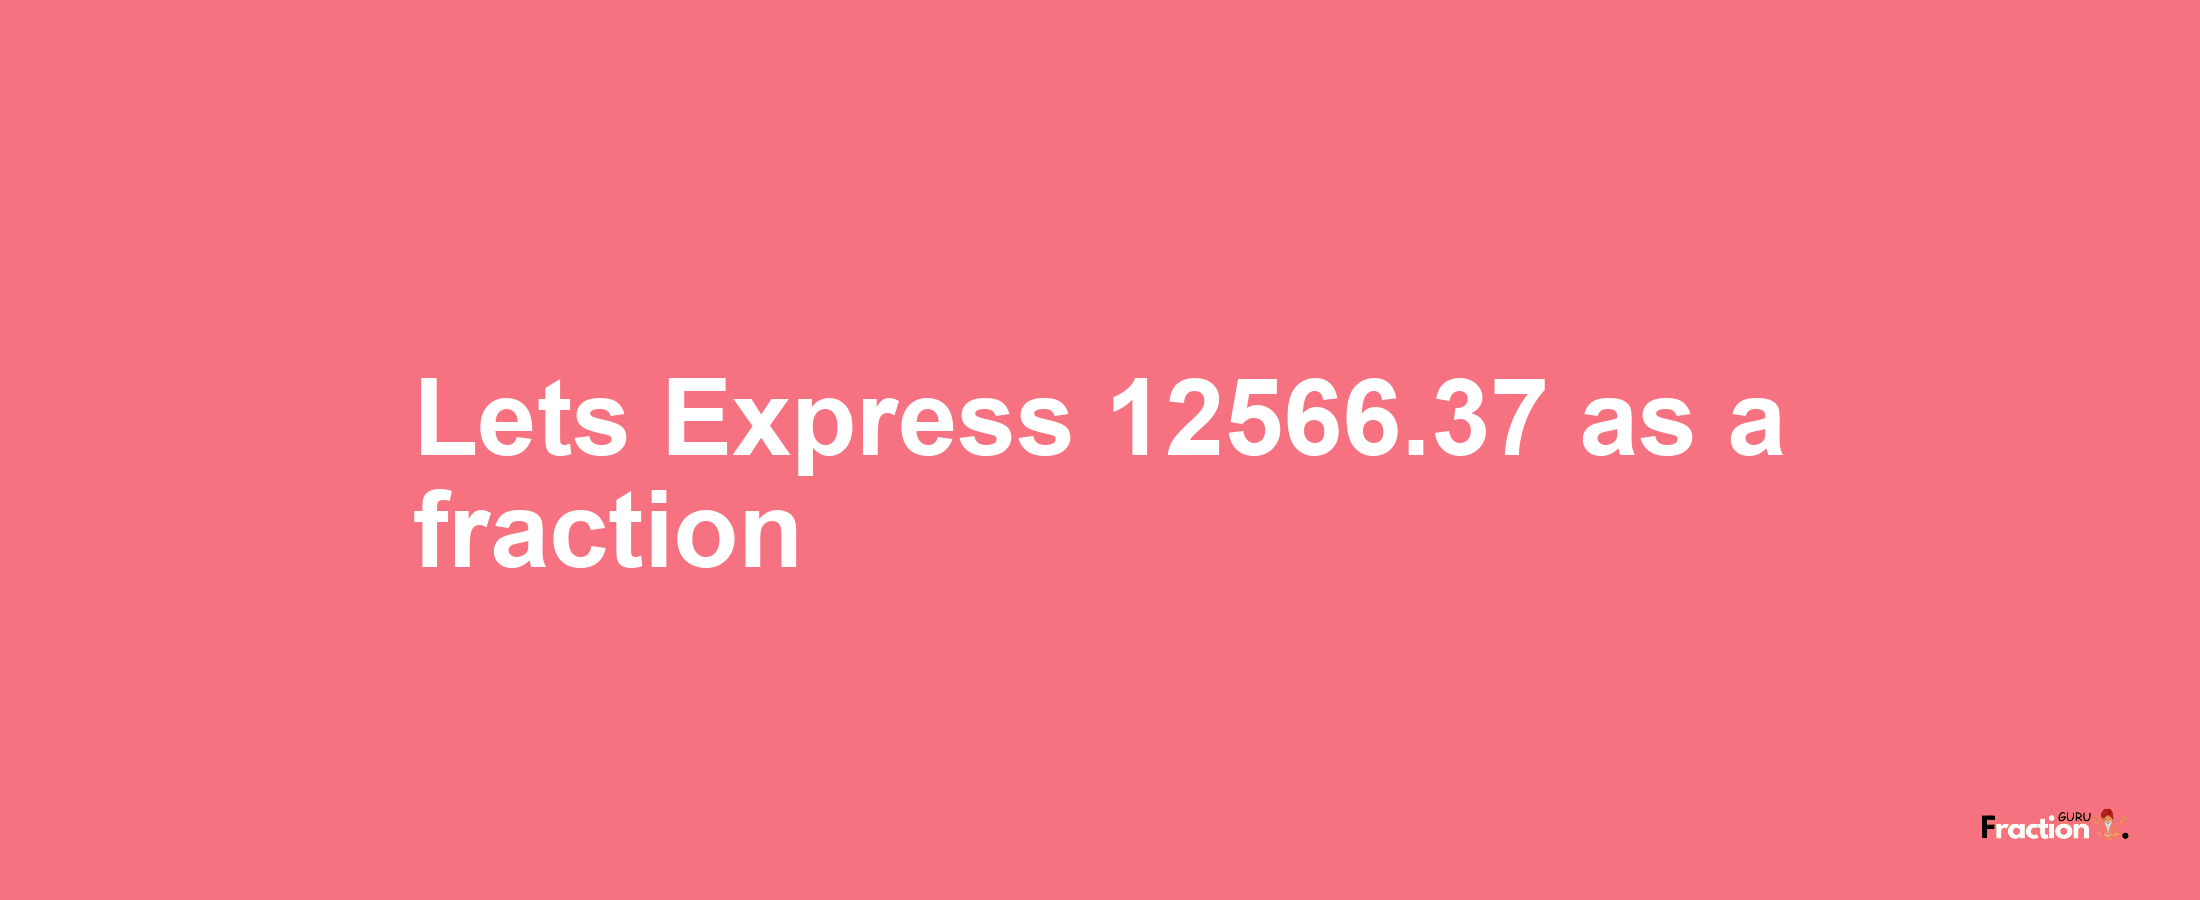 Lets Express 12566.37 as afraction